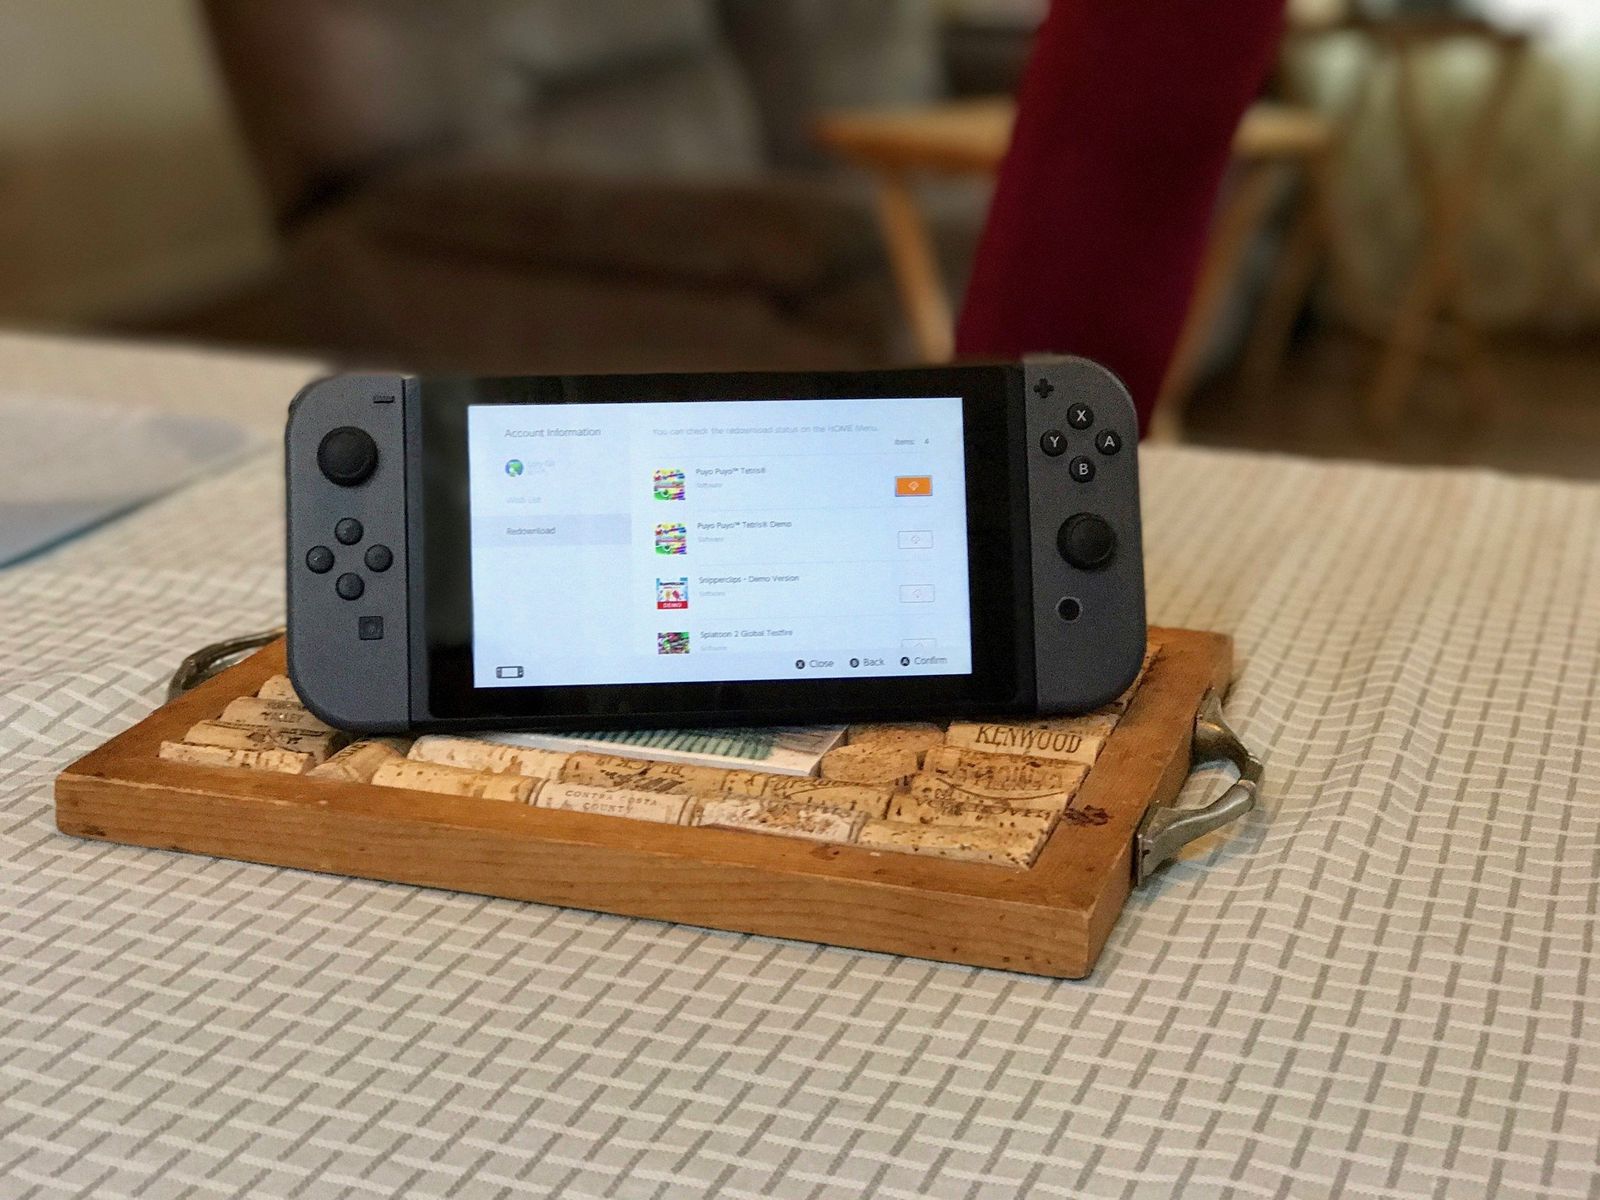 Redownloading games on Switch